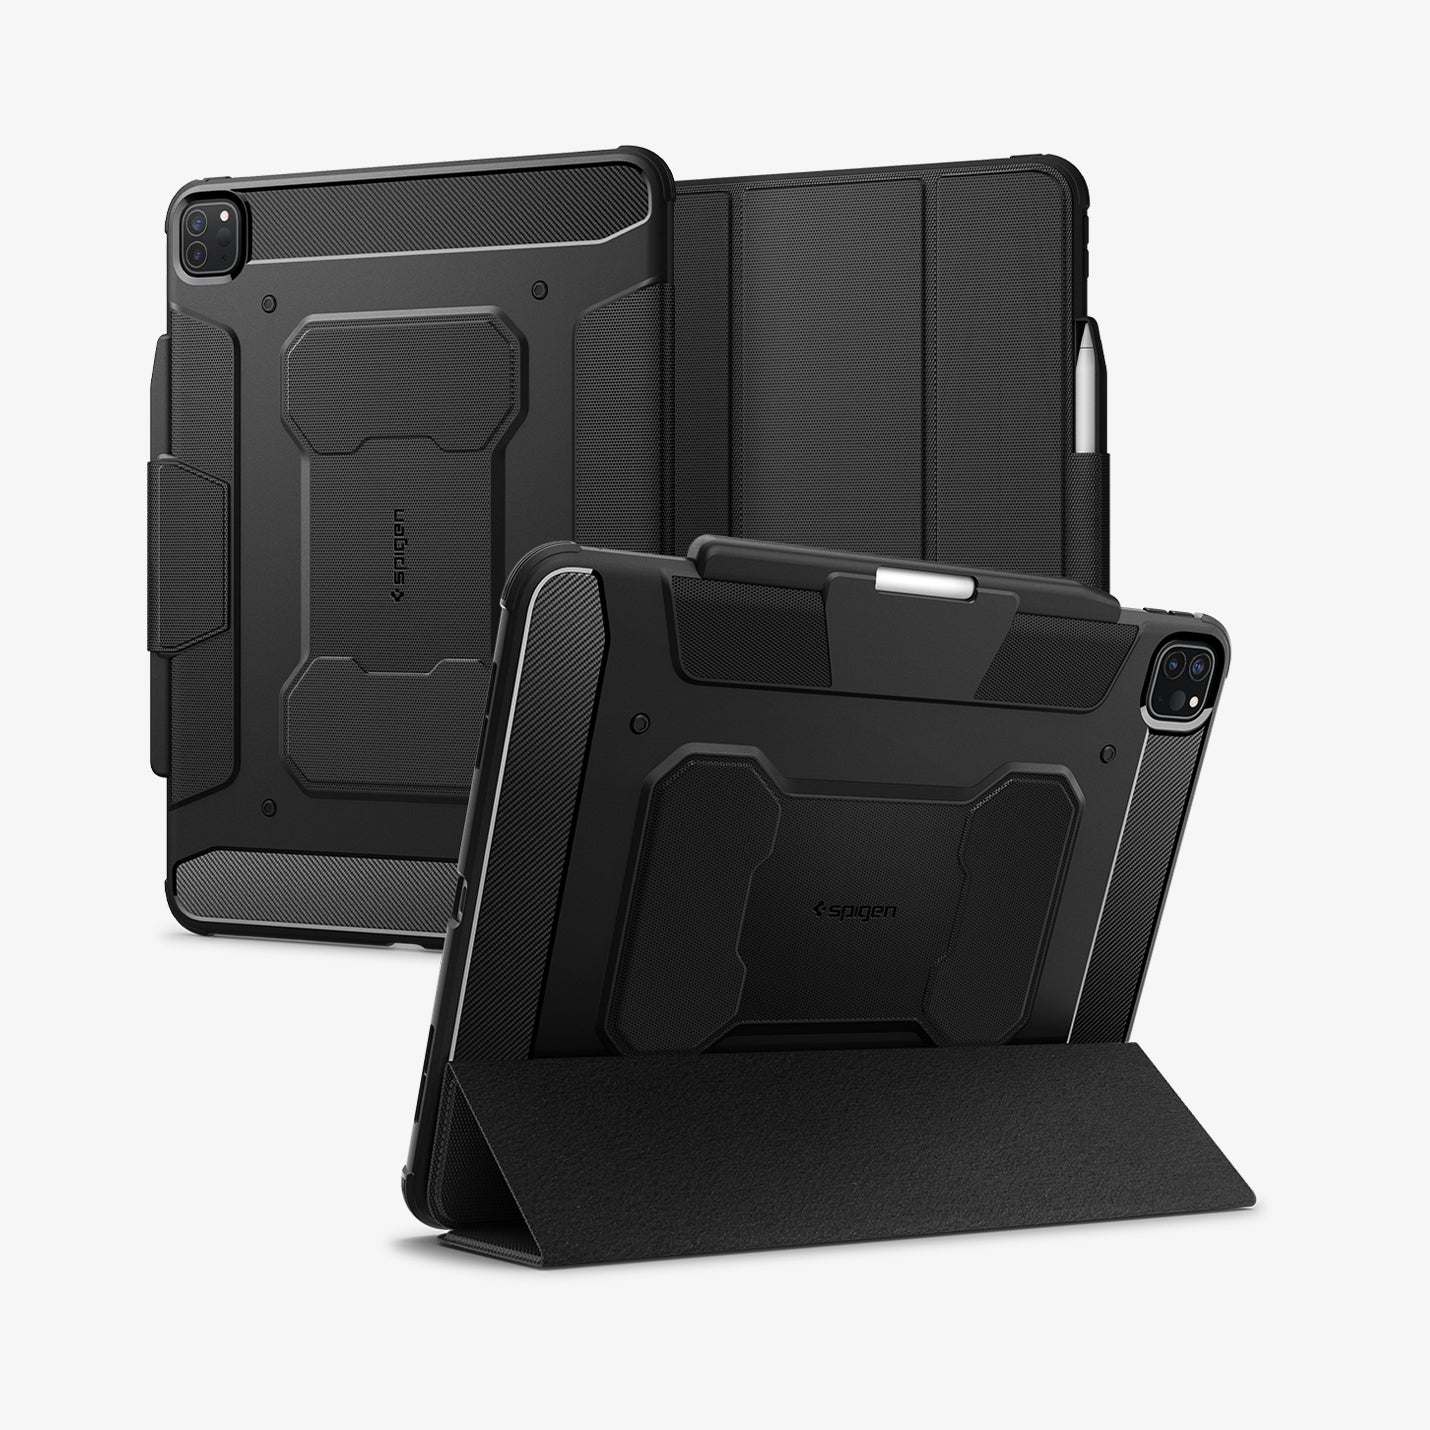 ACS07007 - iPad Pro 12.9-inch Case Rugged Armor Pro in Black showing the back, partial front and another device showing the folded cover converted into kickstand